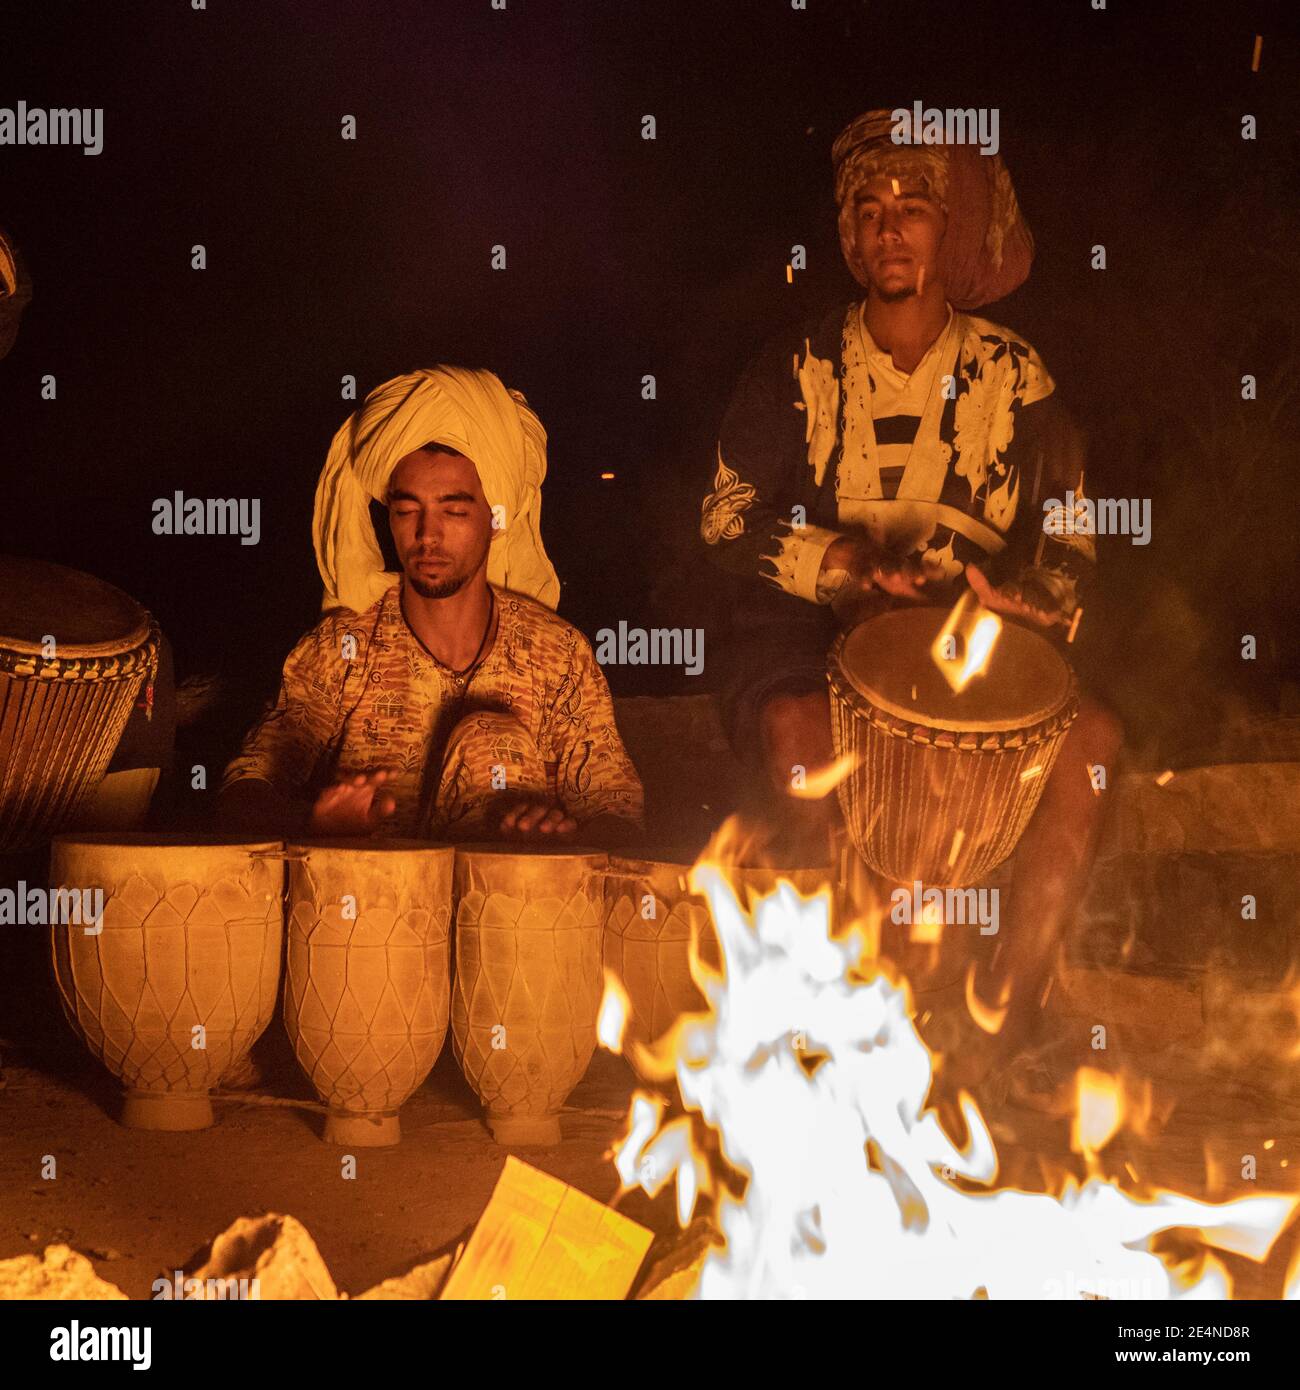 Two young turbaned musicians play their instruments by a campfire in the night Sahara desert. Stock Photo